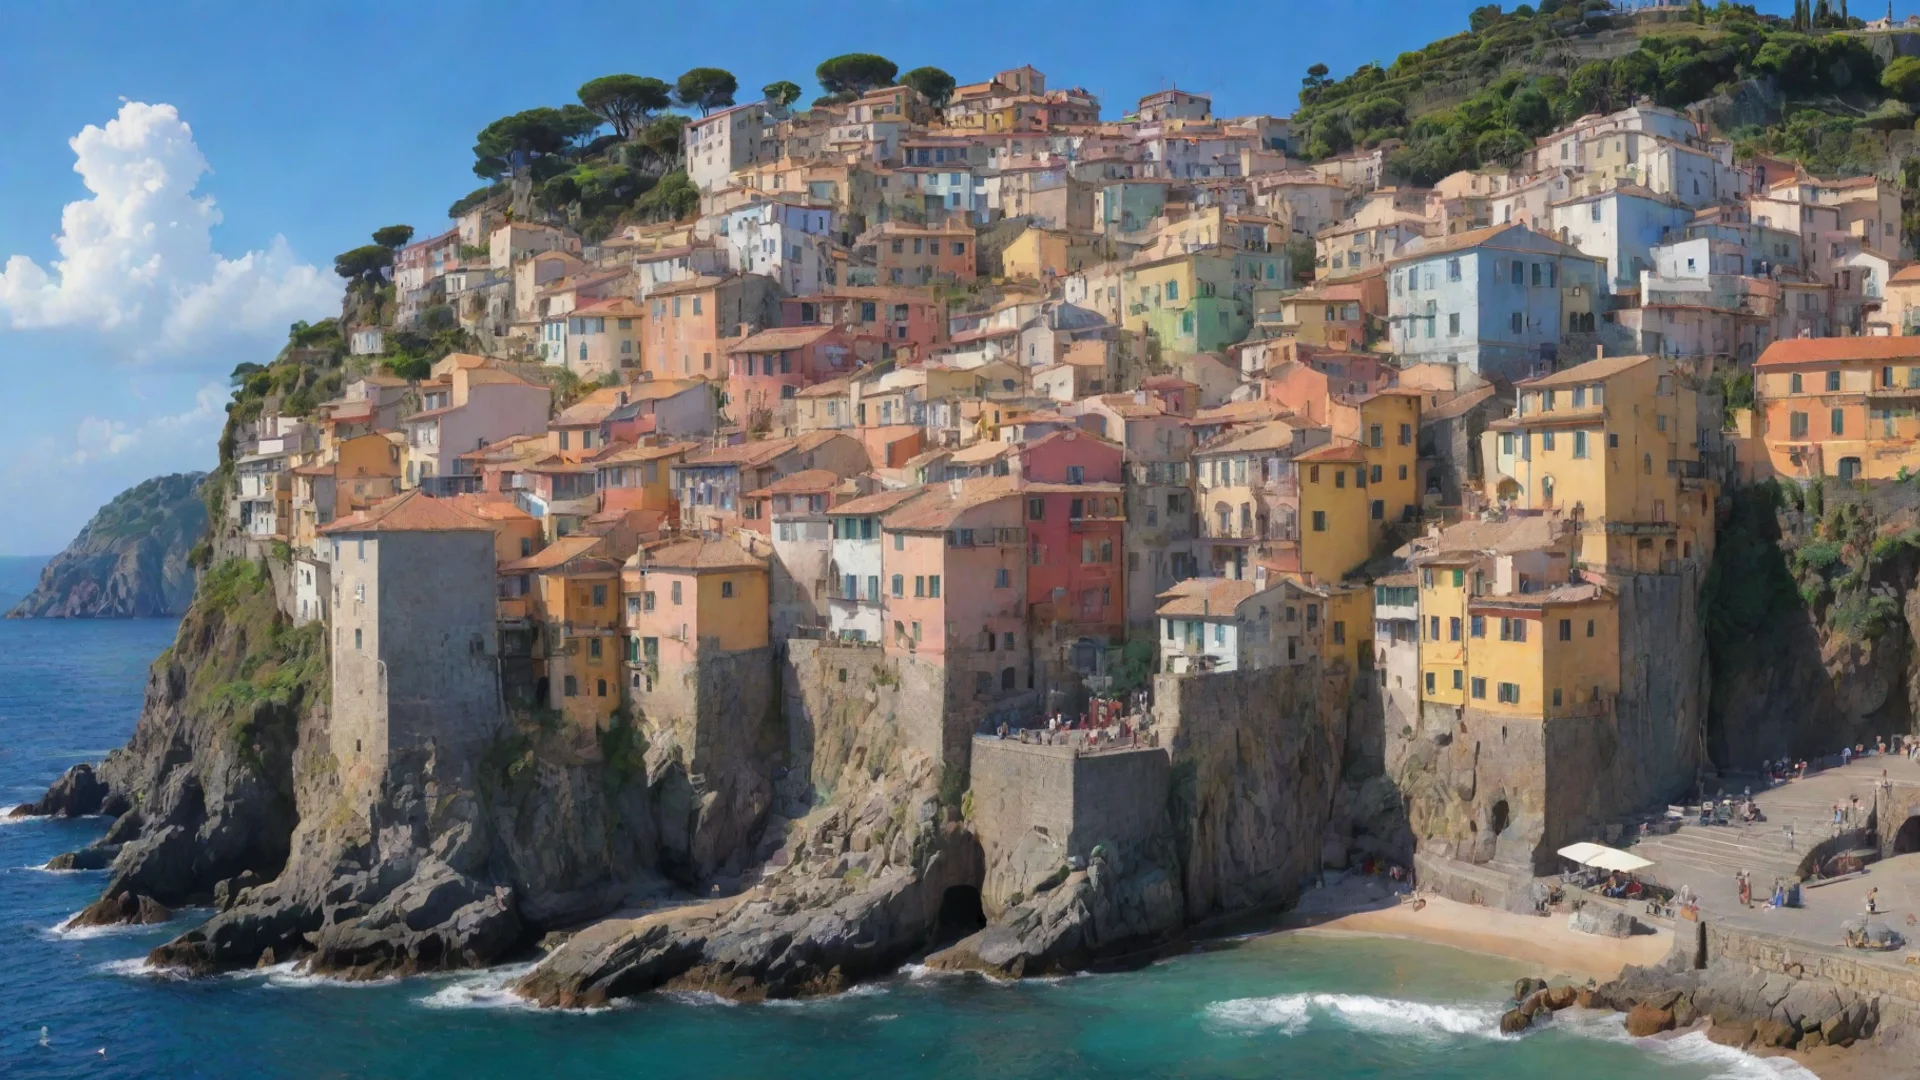 aiamazing ghibli portuguese coastal town hd aesthetic best quality with strong vibrant colors awesome portrait 2 wide